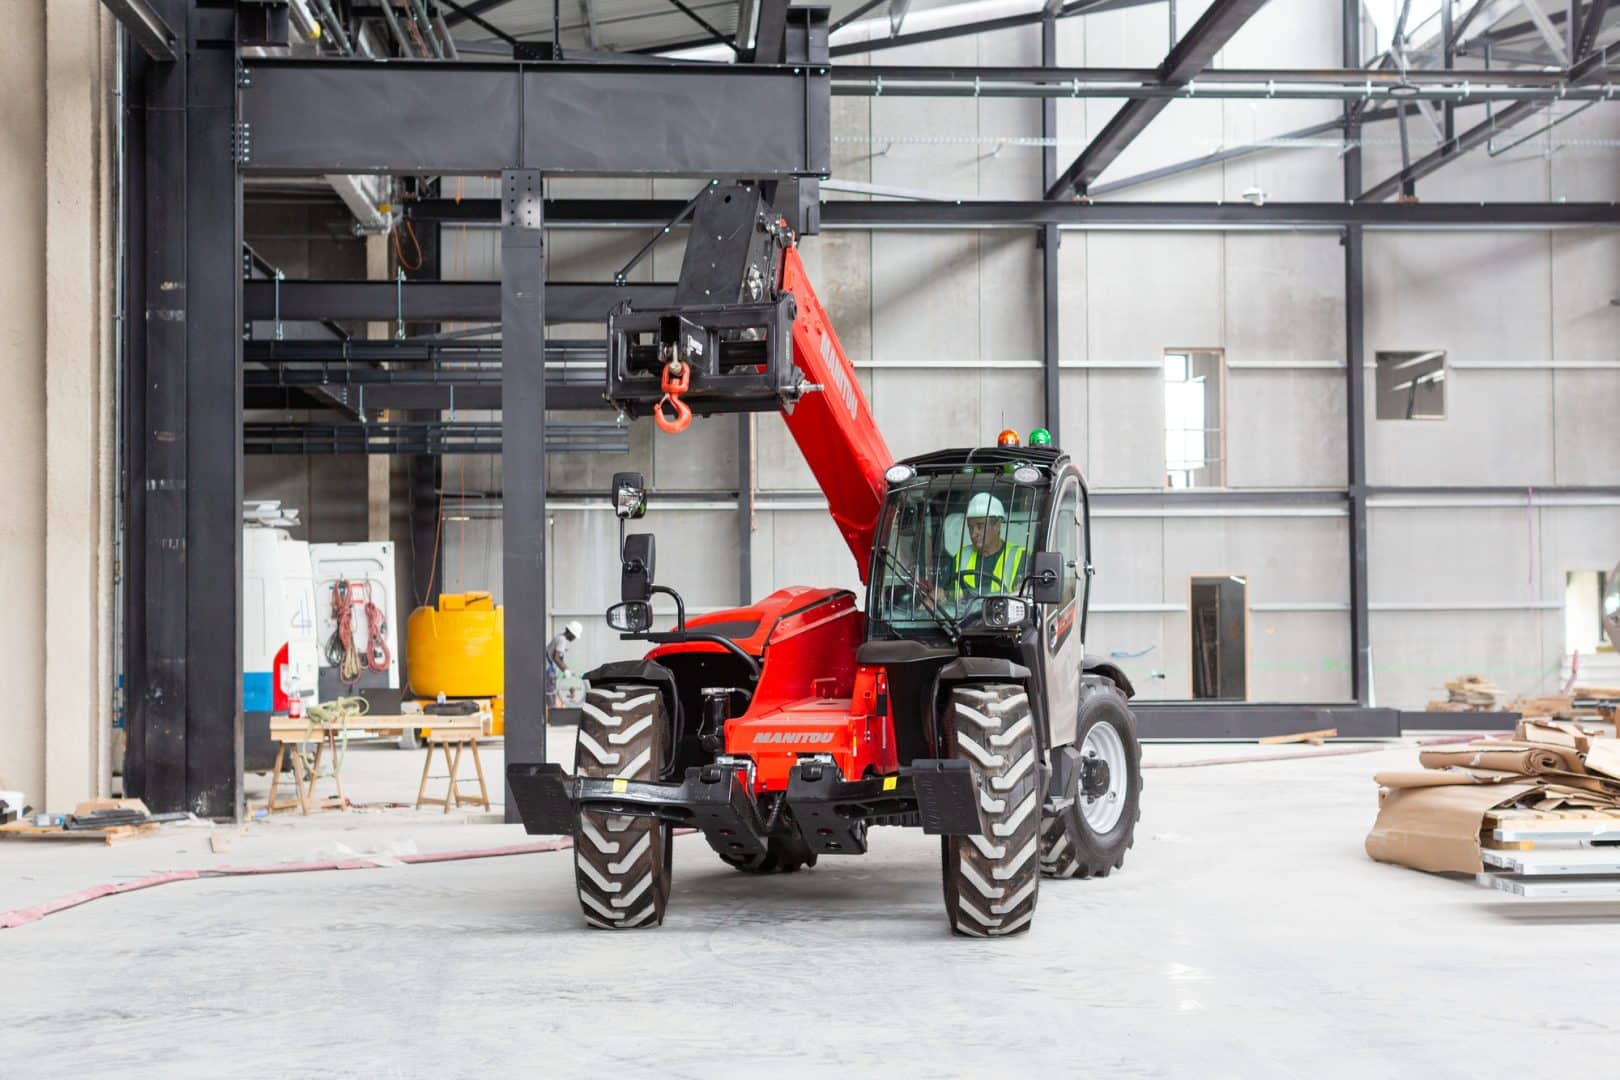 Manitou construction handler on a site